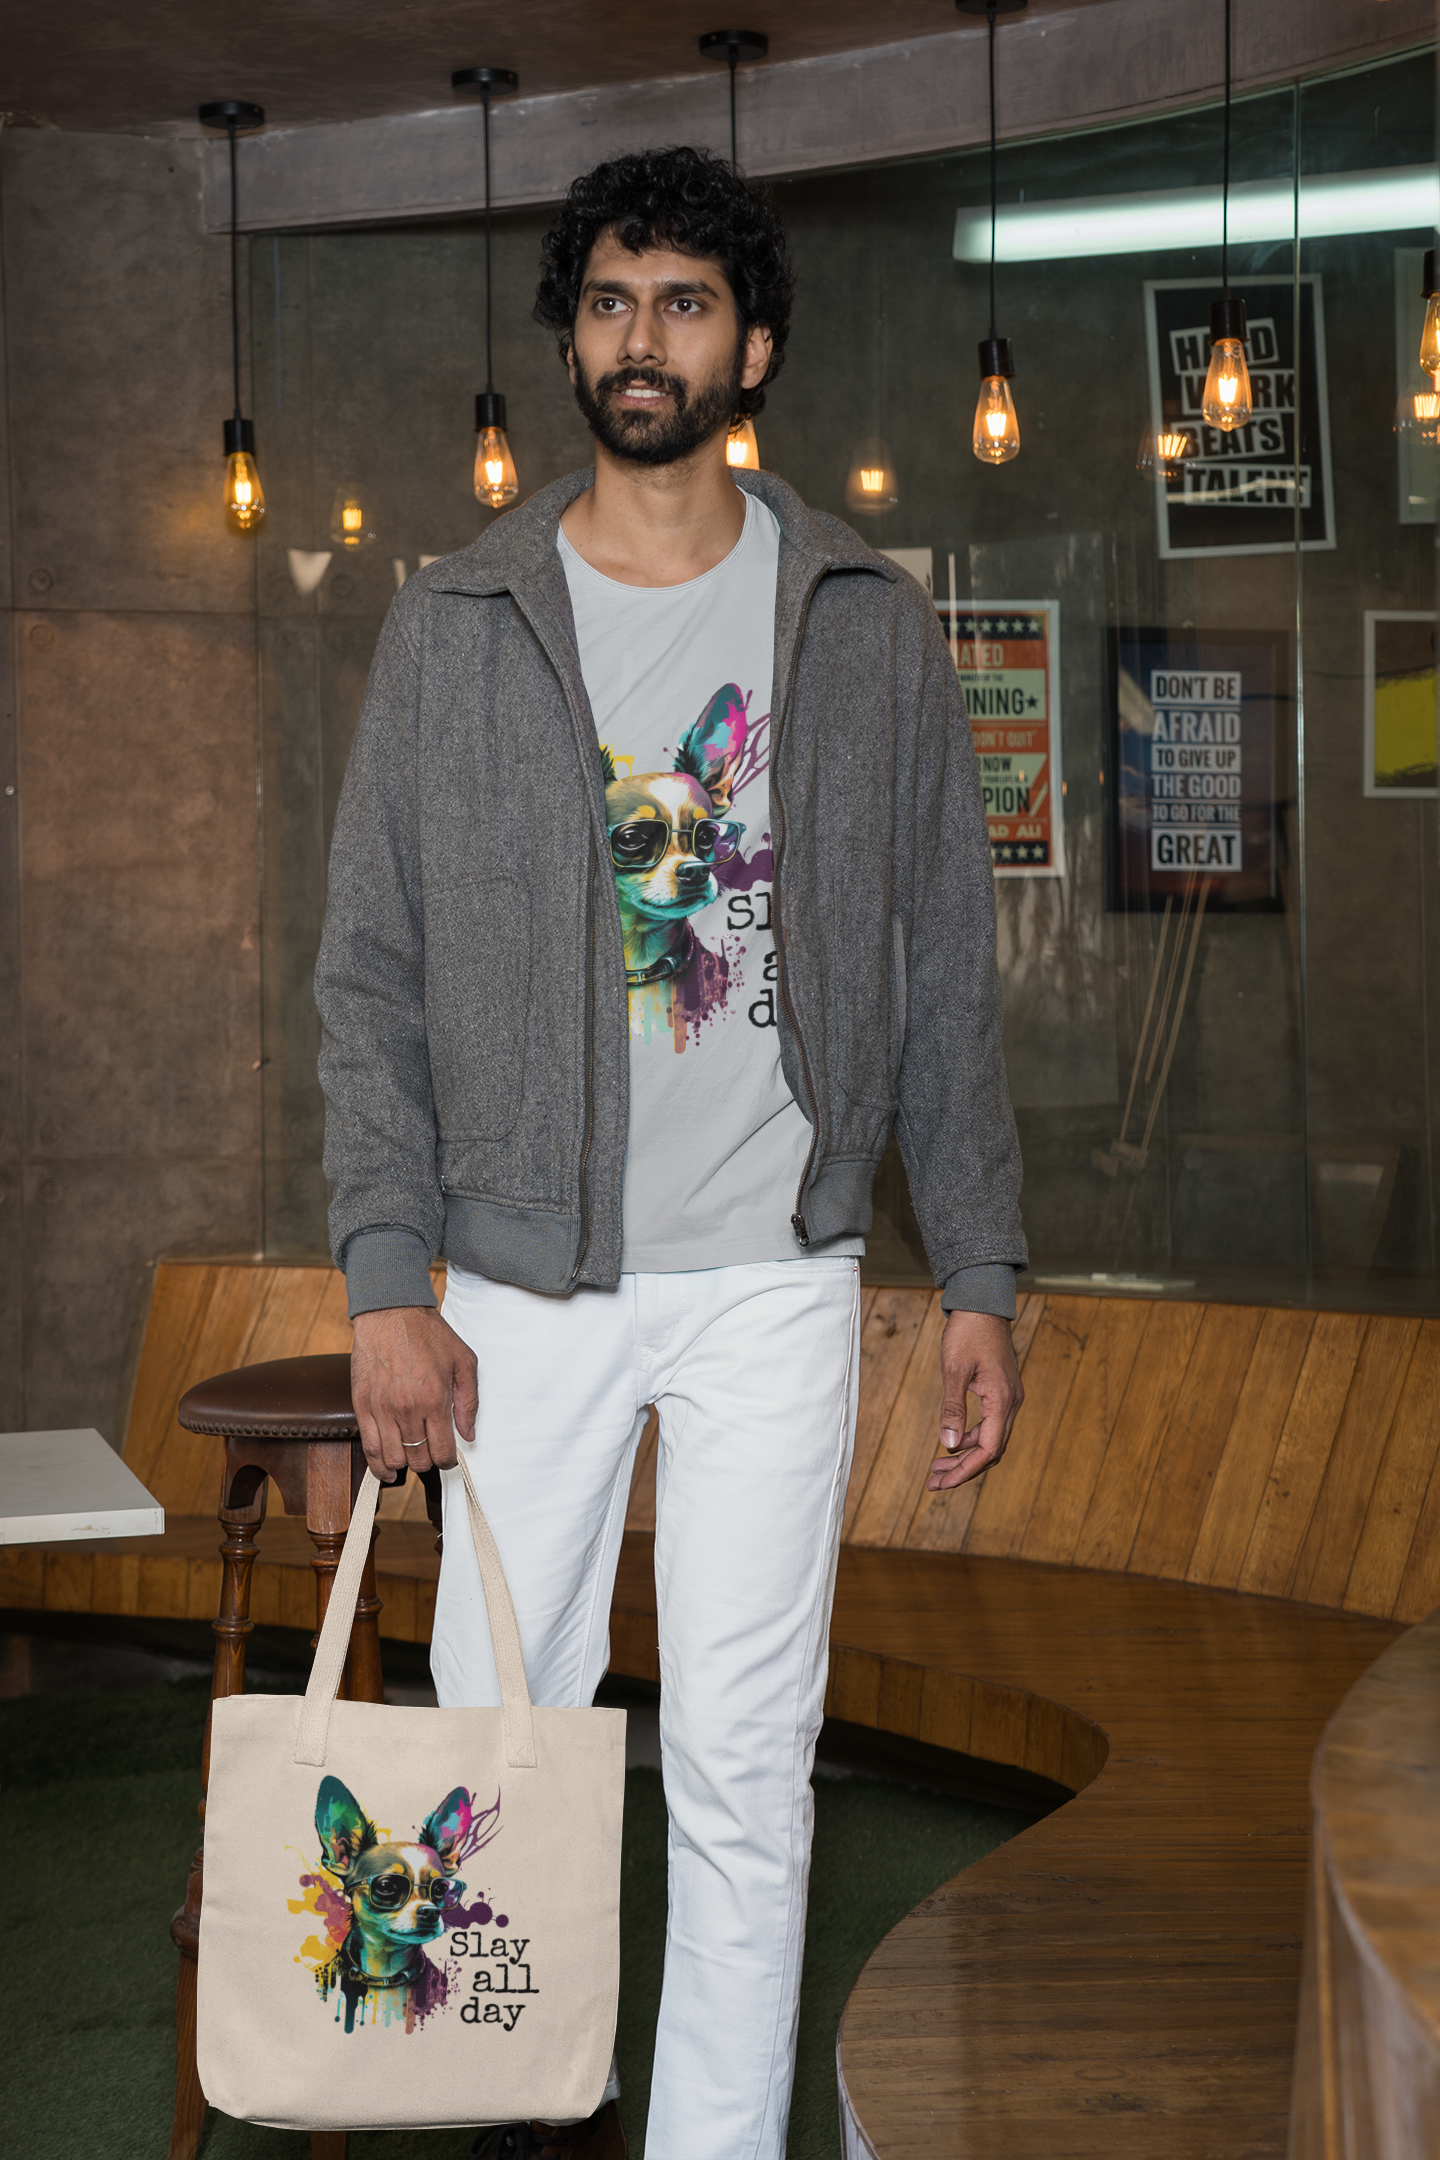 Man with t-shirt and bag